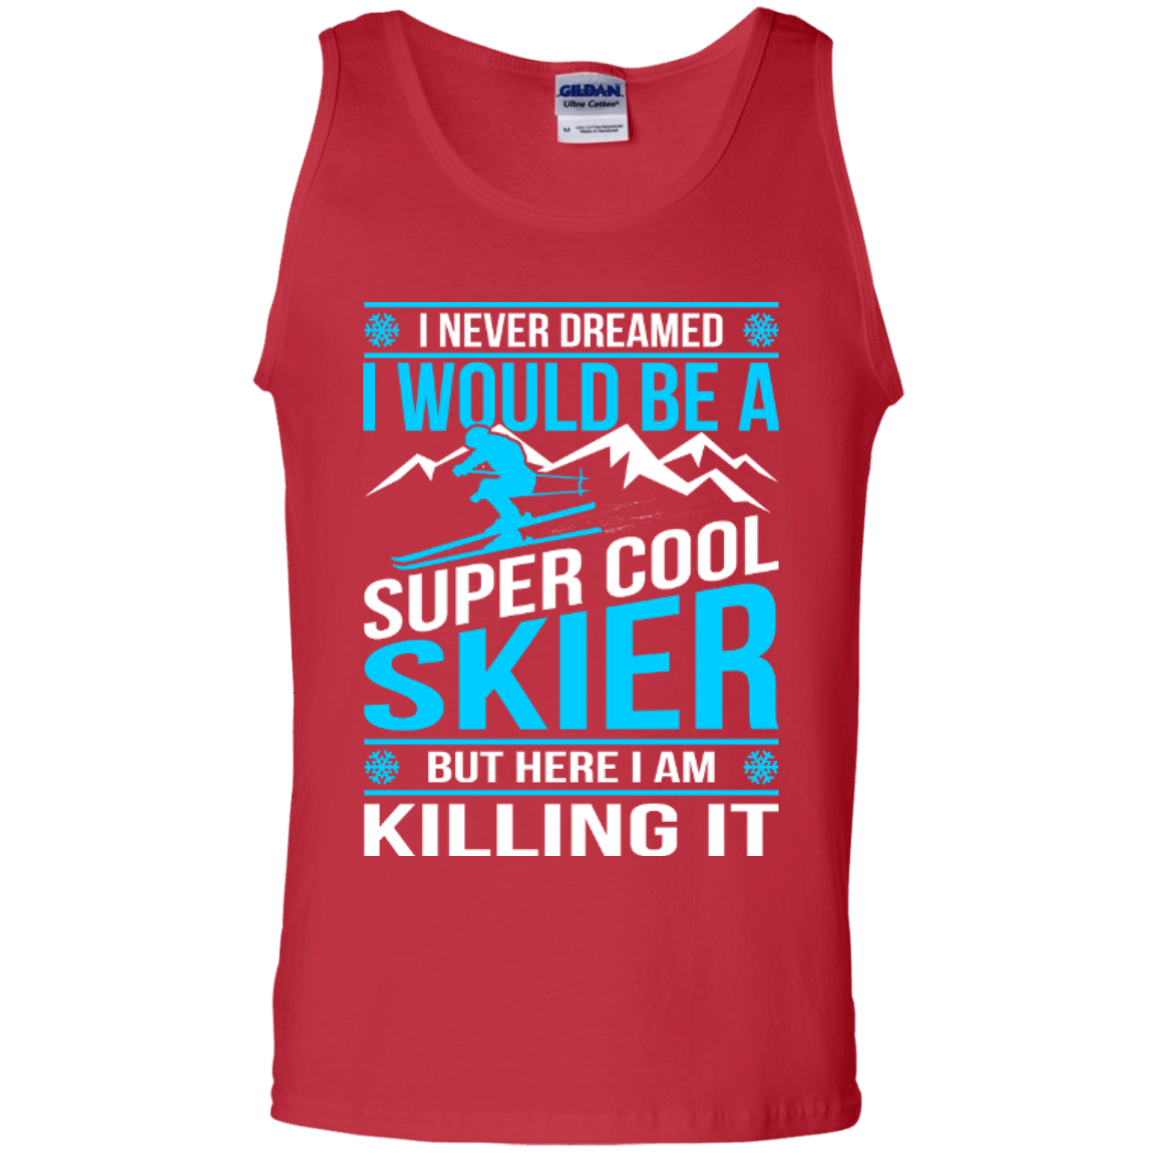 I Never Dreamed I Would Be A Super Cool Skier But Here I Am Killing It Tank Tops - Powderaddicts